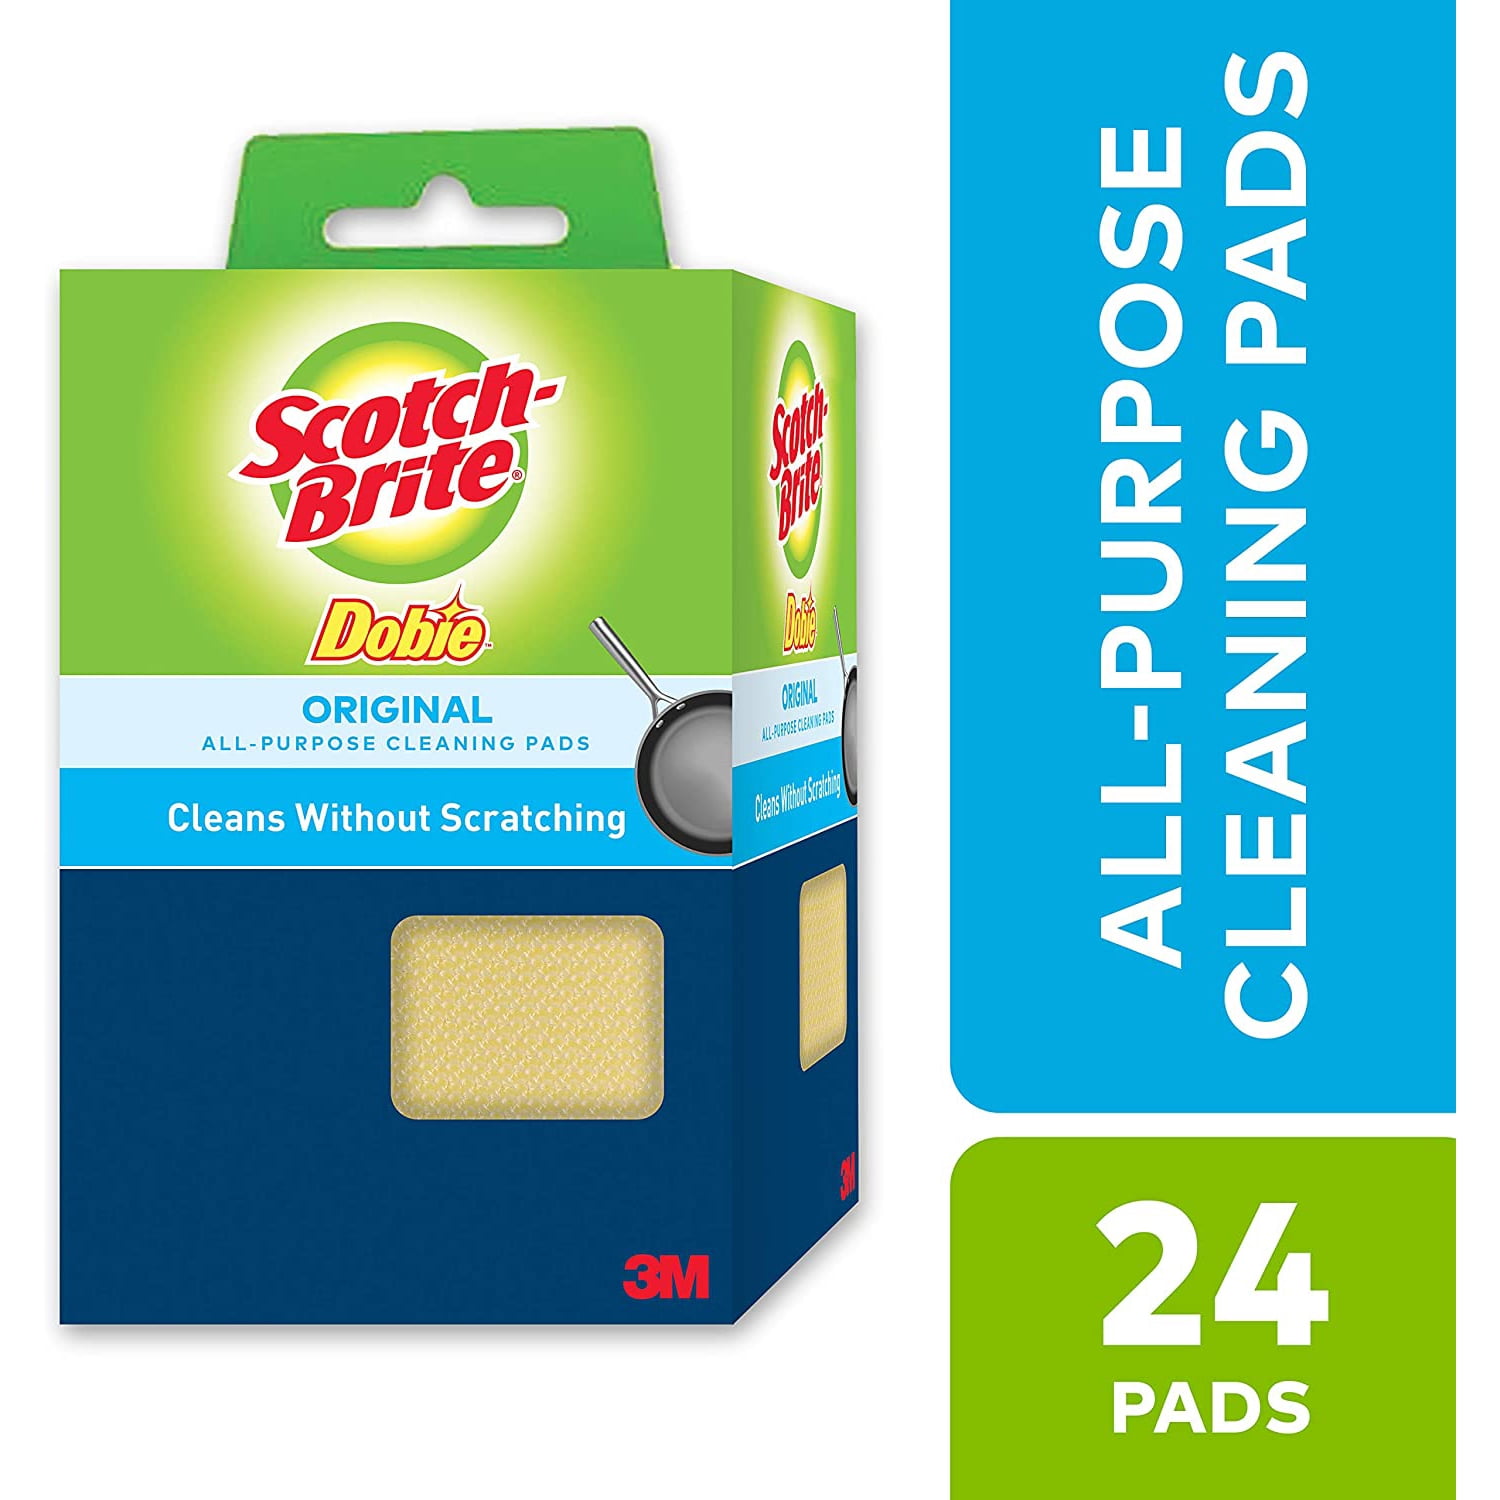 Handy Housewares 10-Piece Multi-Colored Non-Scratch Multi-Purpose Cleaning Scouring Pads 1 Set